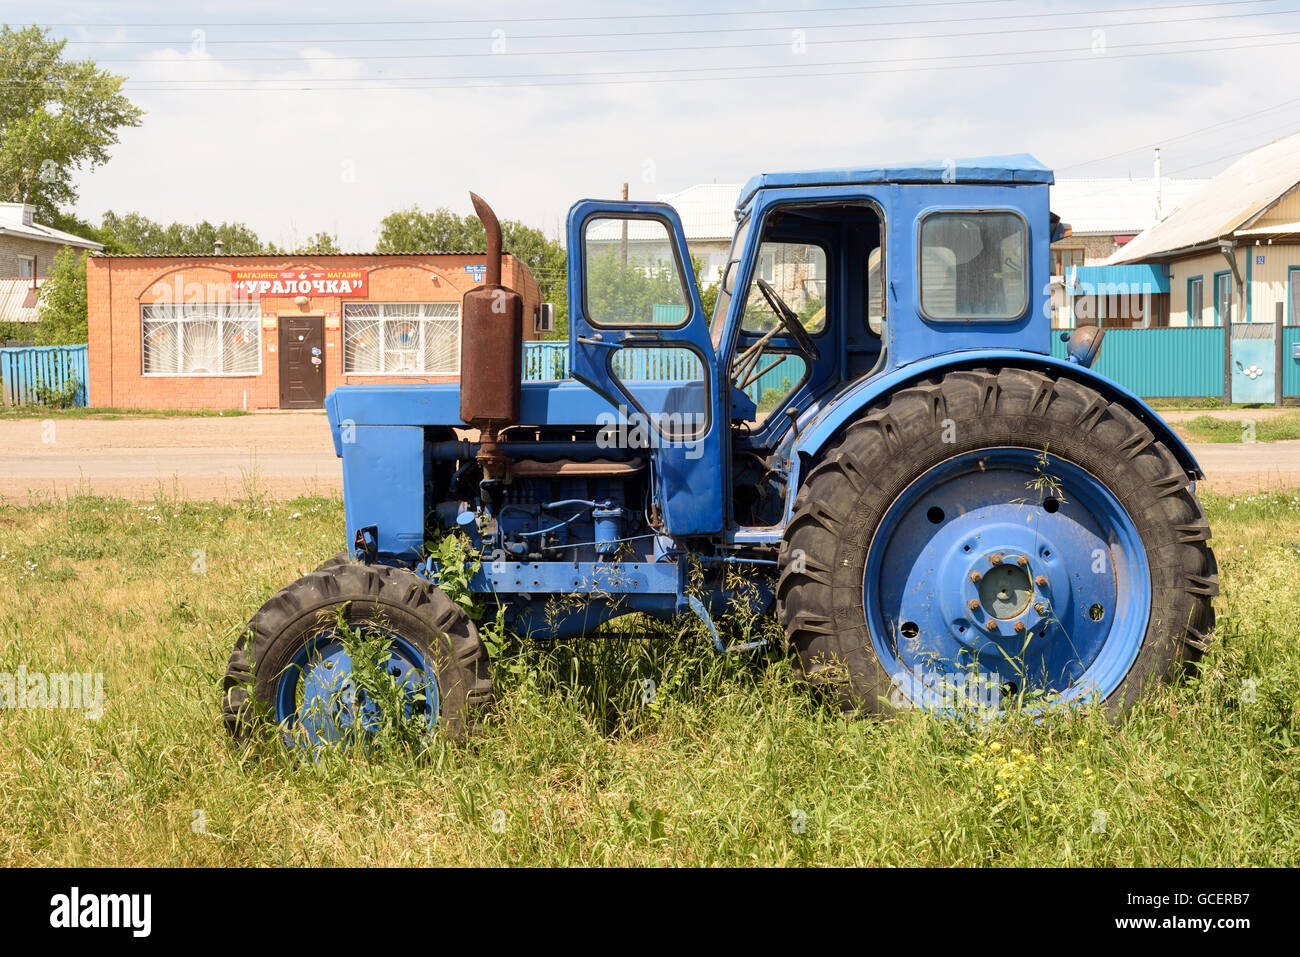 Single blue painted broken down tractor outside in sunlight Stock Photo